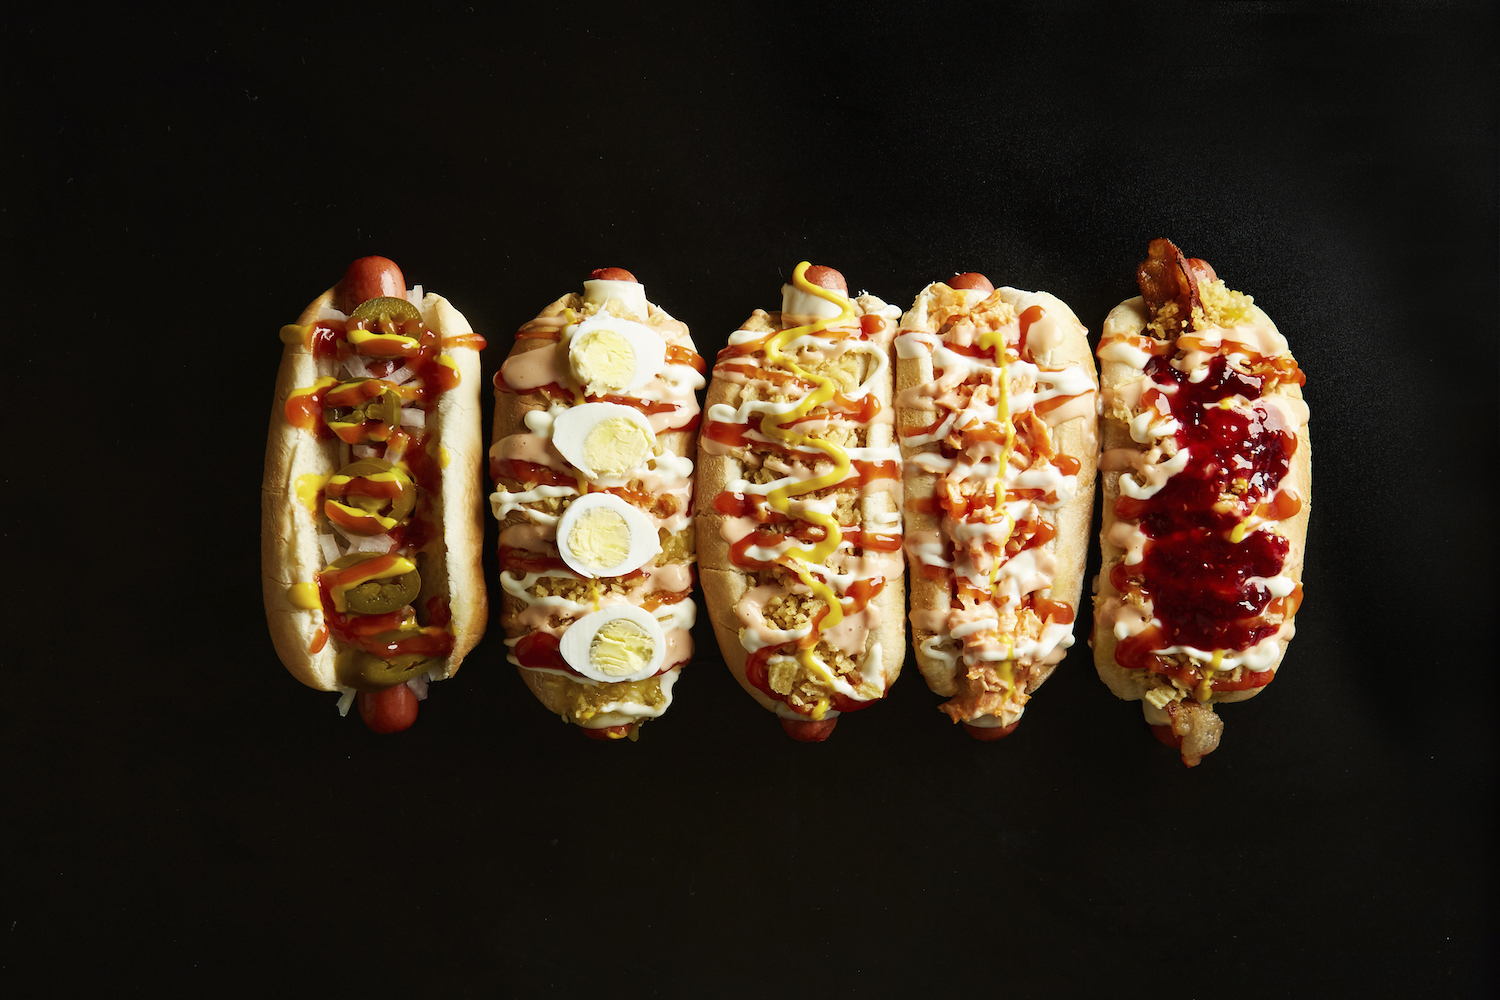 The lineup of specialty hot dogs from El Perro in Jackson Heights.